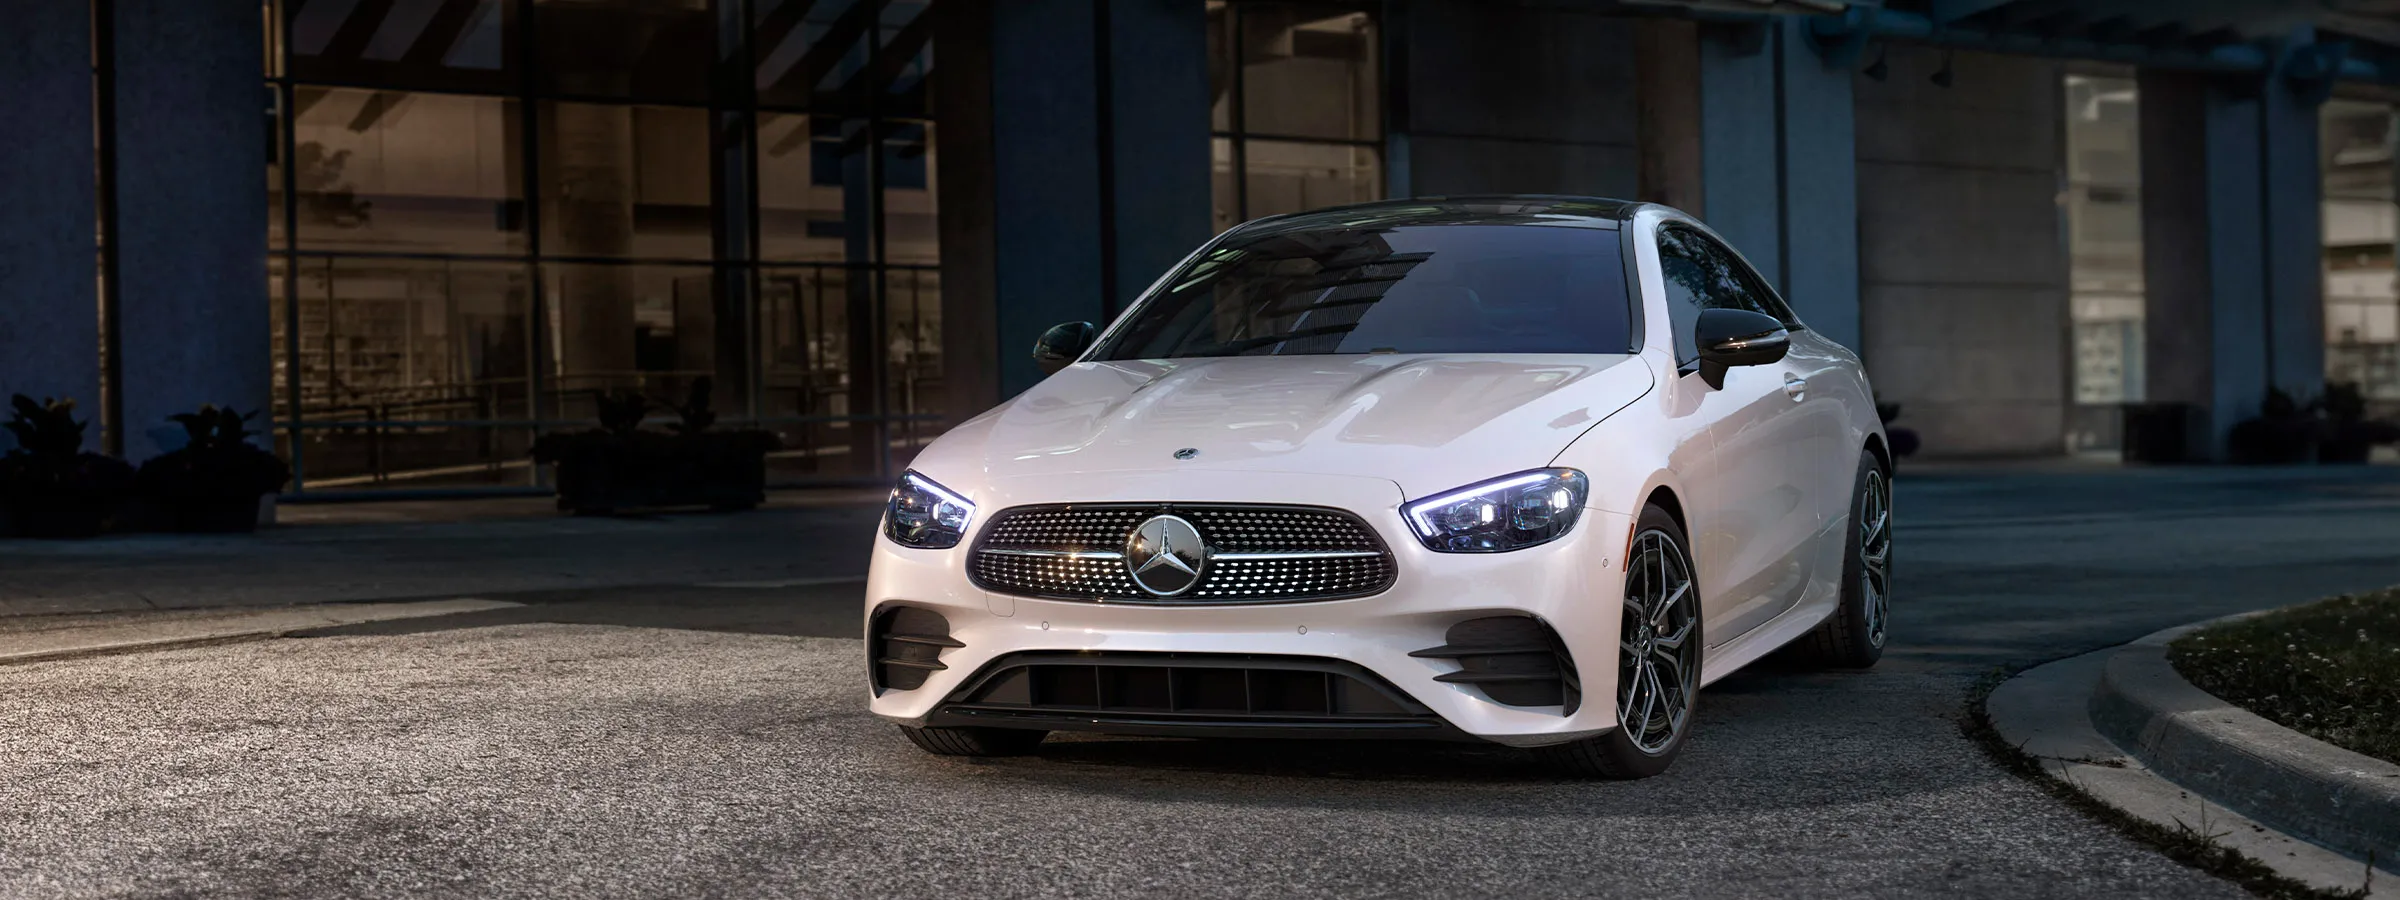 Elevate your Mercedes E-Class with PRIOR-DESIGN Aerodynamic-Kit